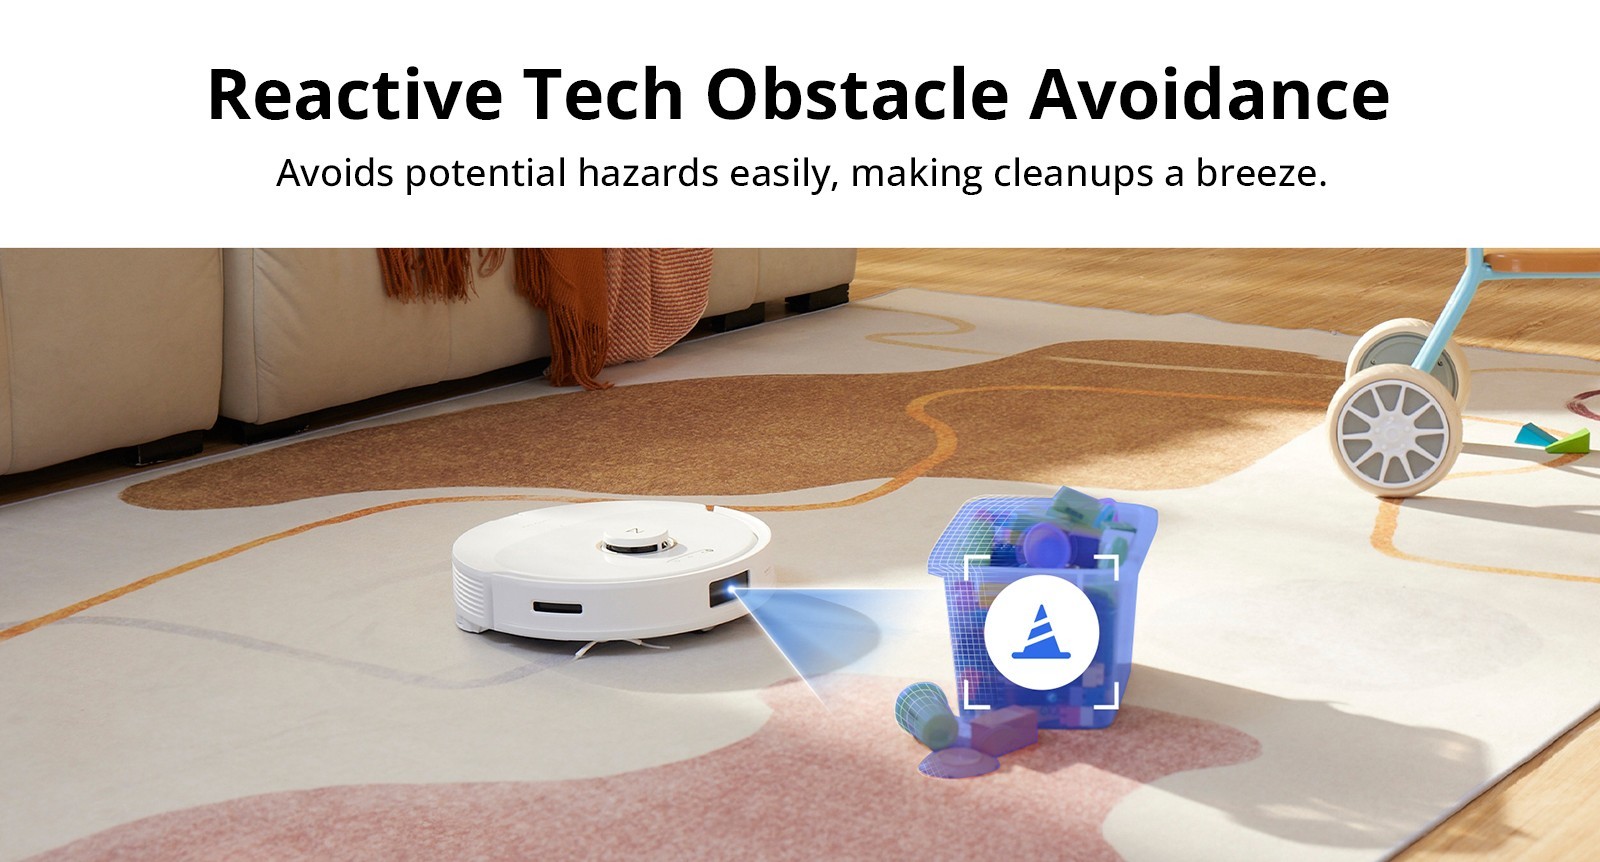 Roborock Q8 Max+ Robot Vacuum Cleaner with Auto Empty Dock, 5500Pa Suction, DuoRoller Brush, LDS Navigation